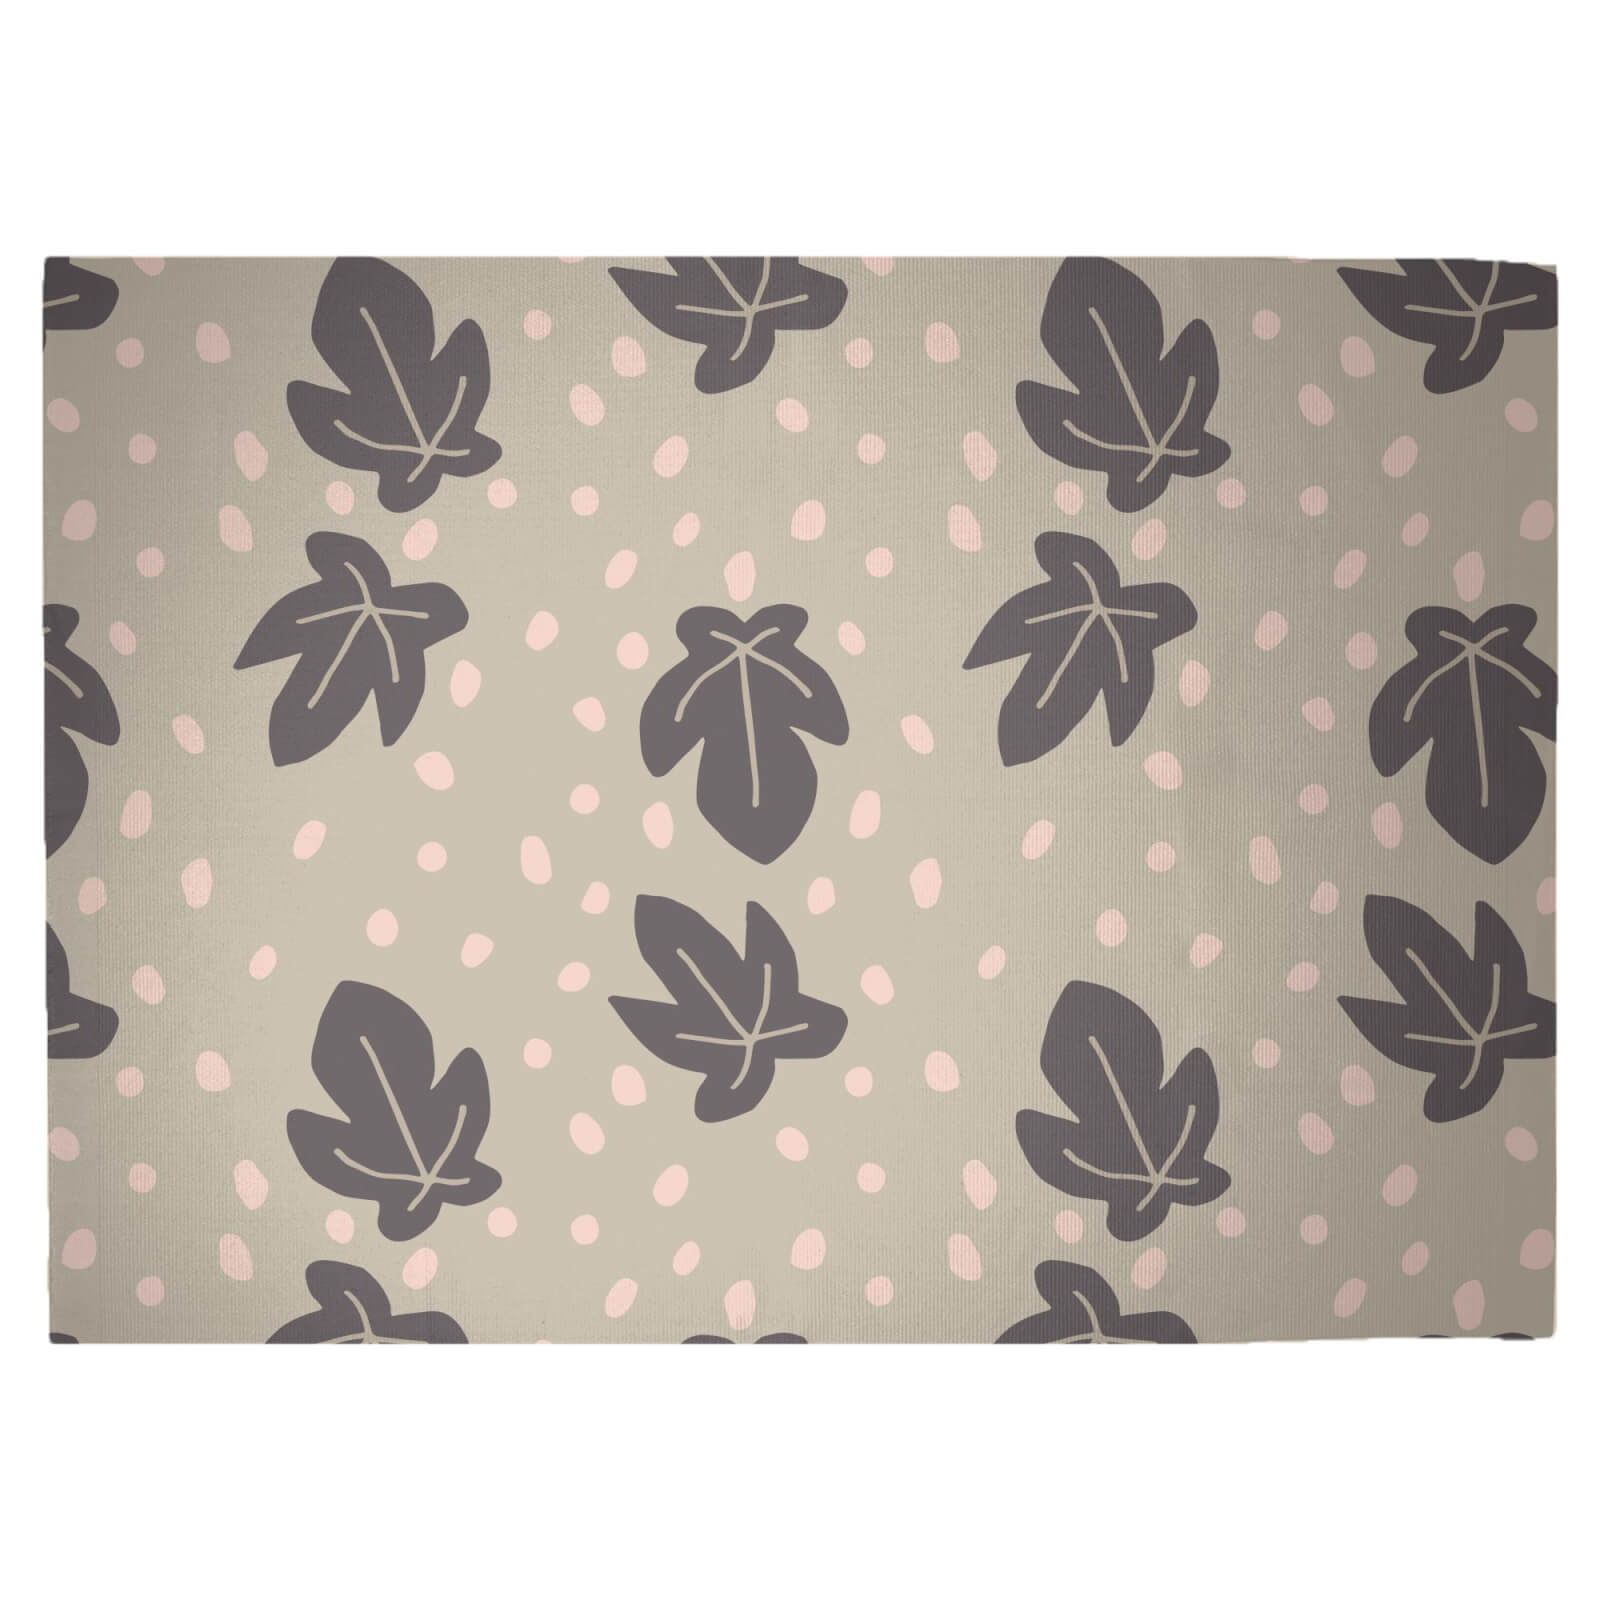 Dotty Leaves Woven Rug - Large